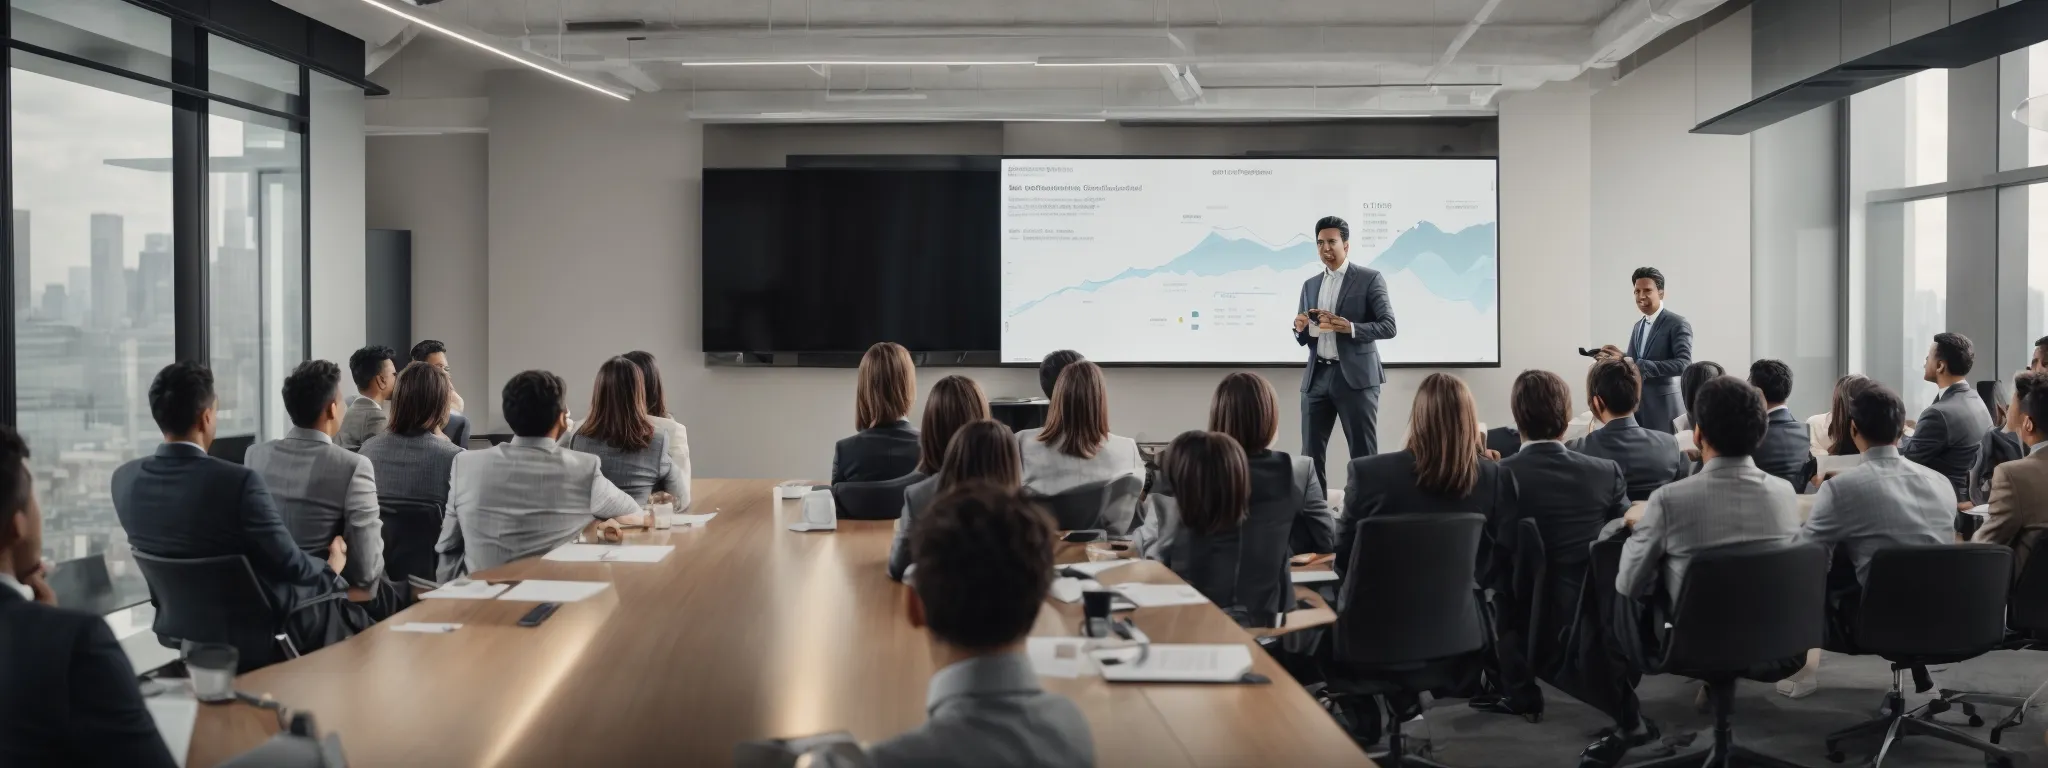 a professional delivering a presentation to an engaged audience in a modern conference room, highlighting the intersection of seo and advanced call tracking on a large screen.